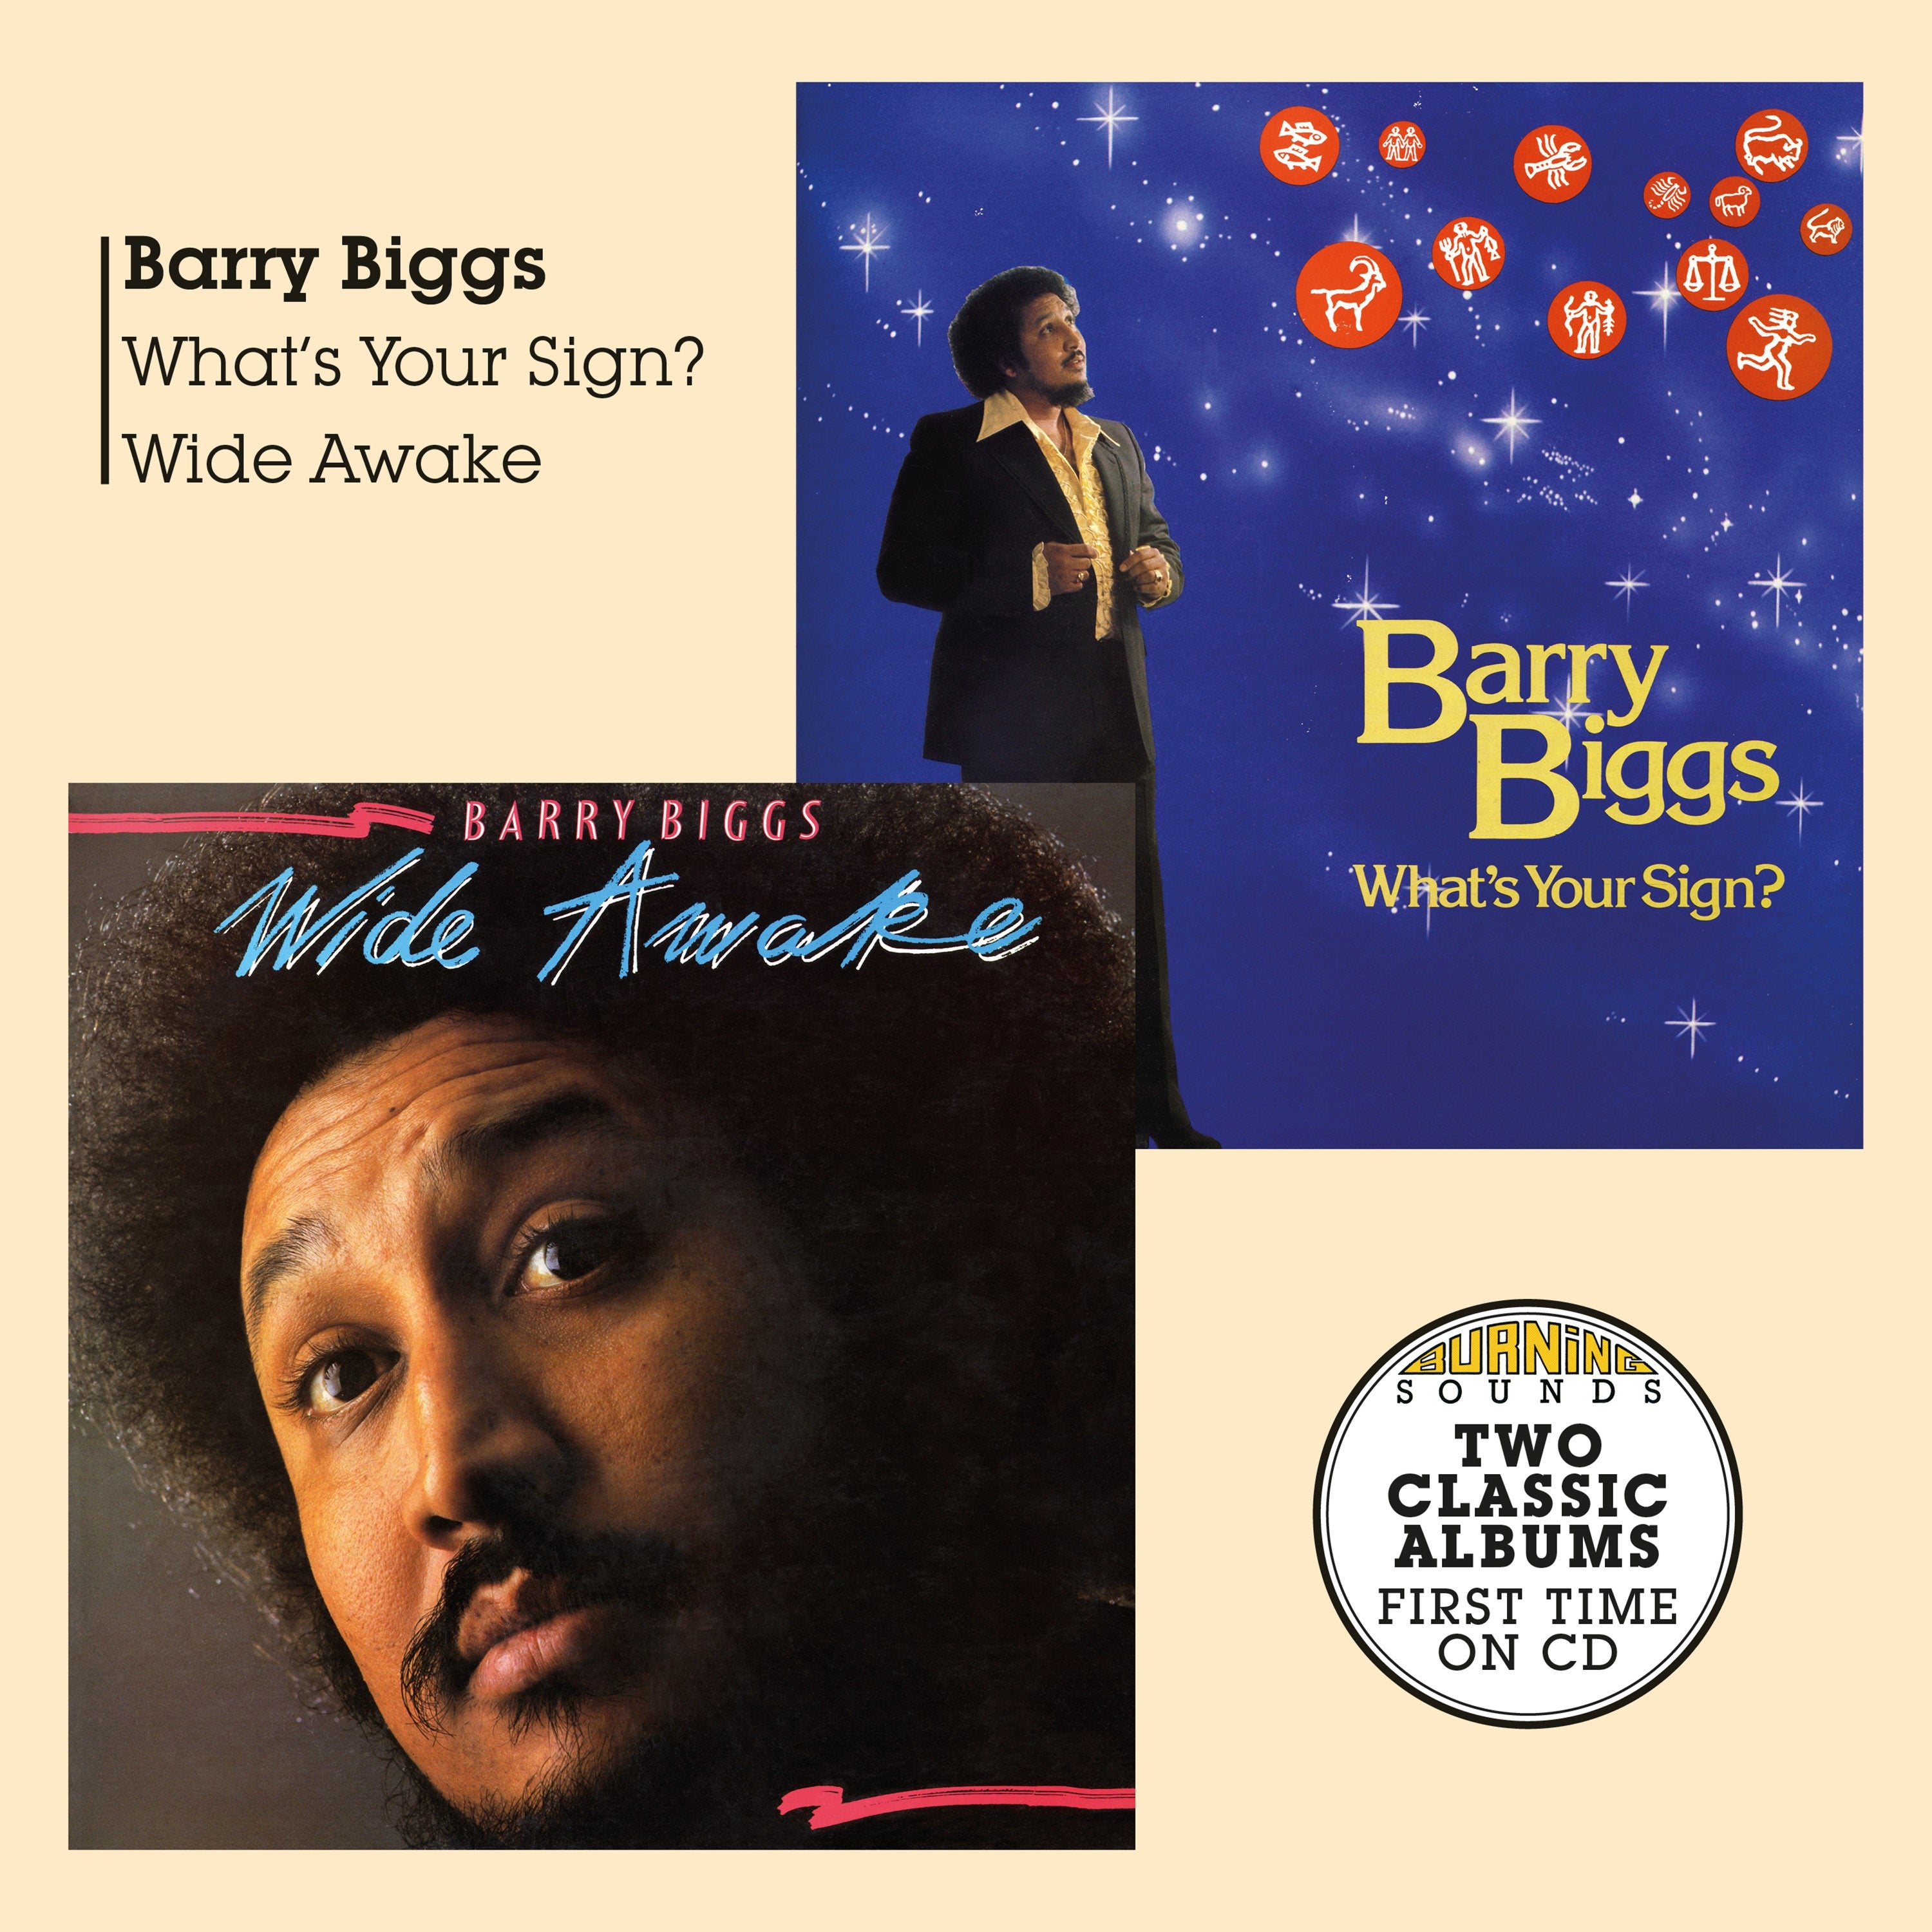 Barry Biggs - What's Your Sign? / Wide Awake - 2CD Album